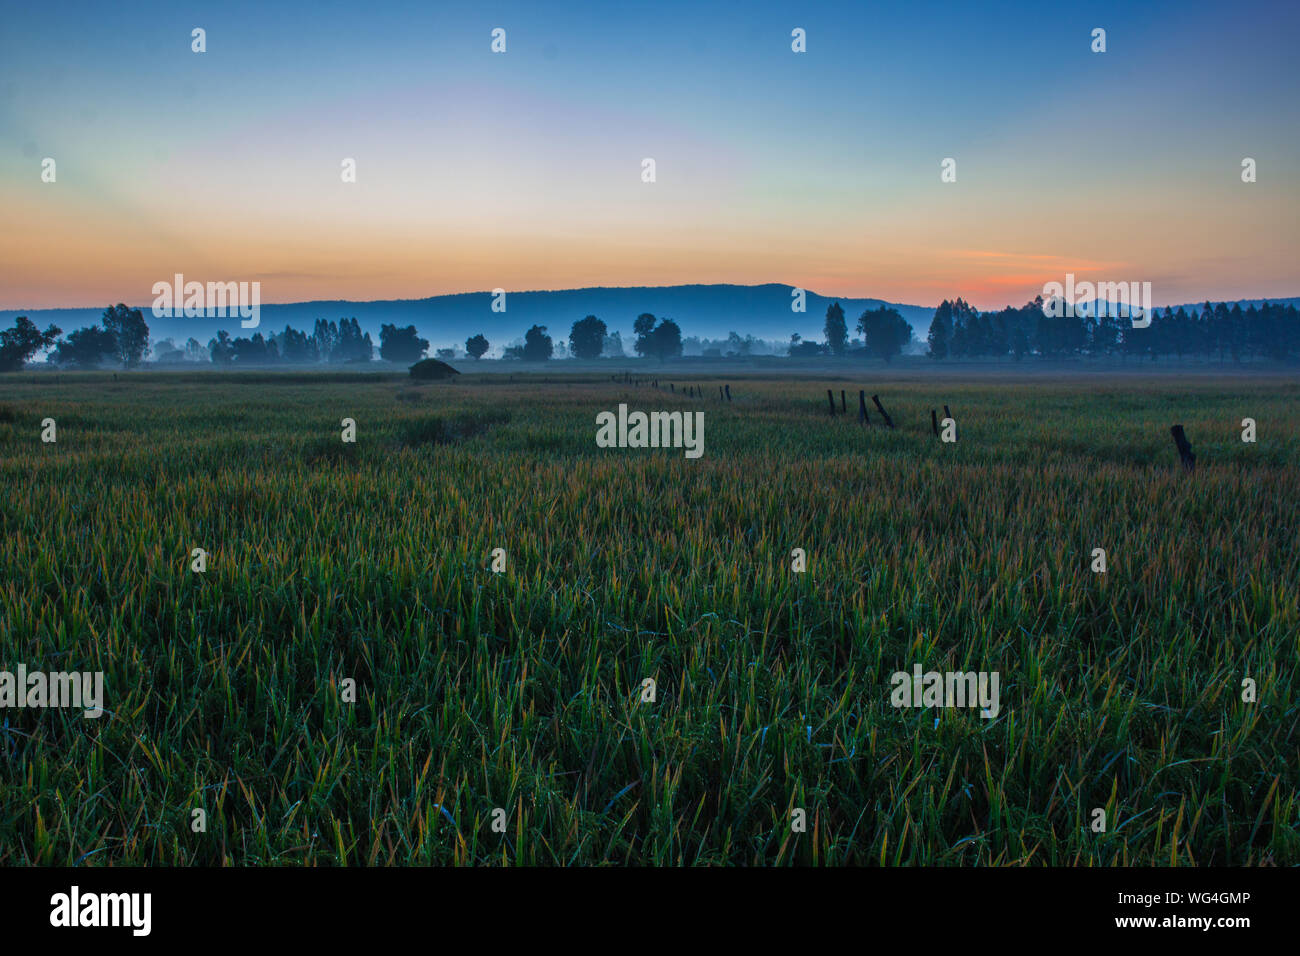 Scenic View Of Agricultural Field Against Sky During Sunset Stock Photo